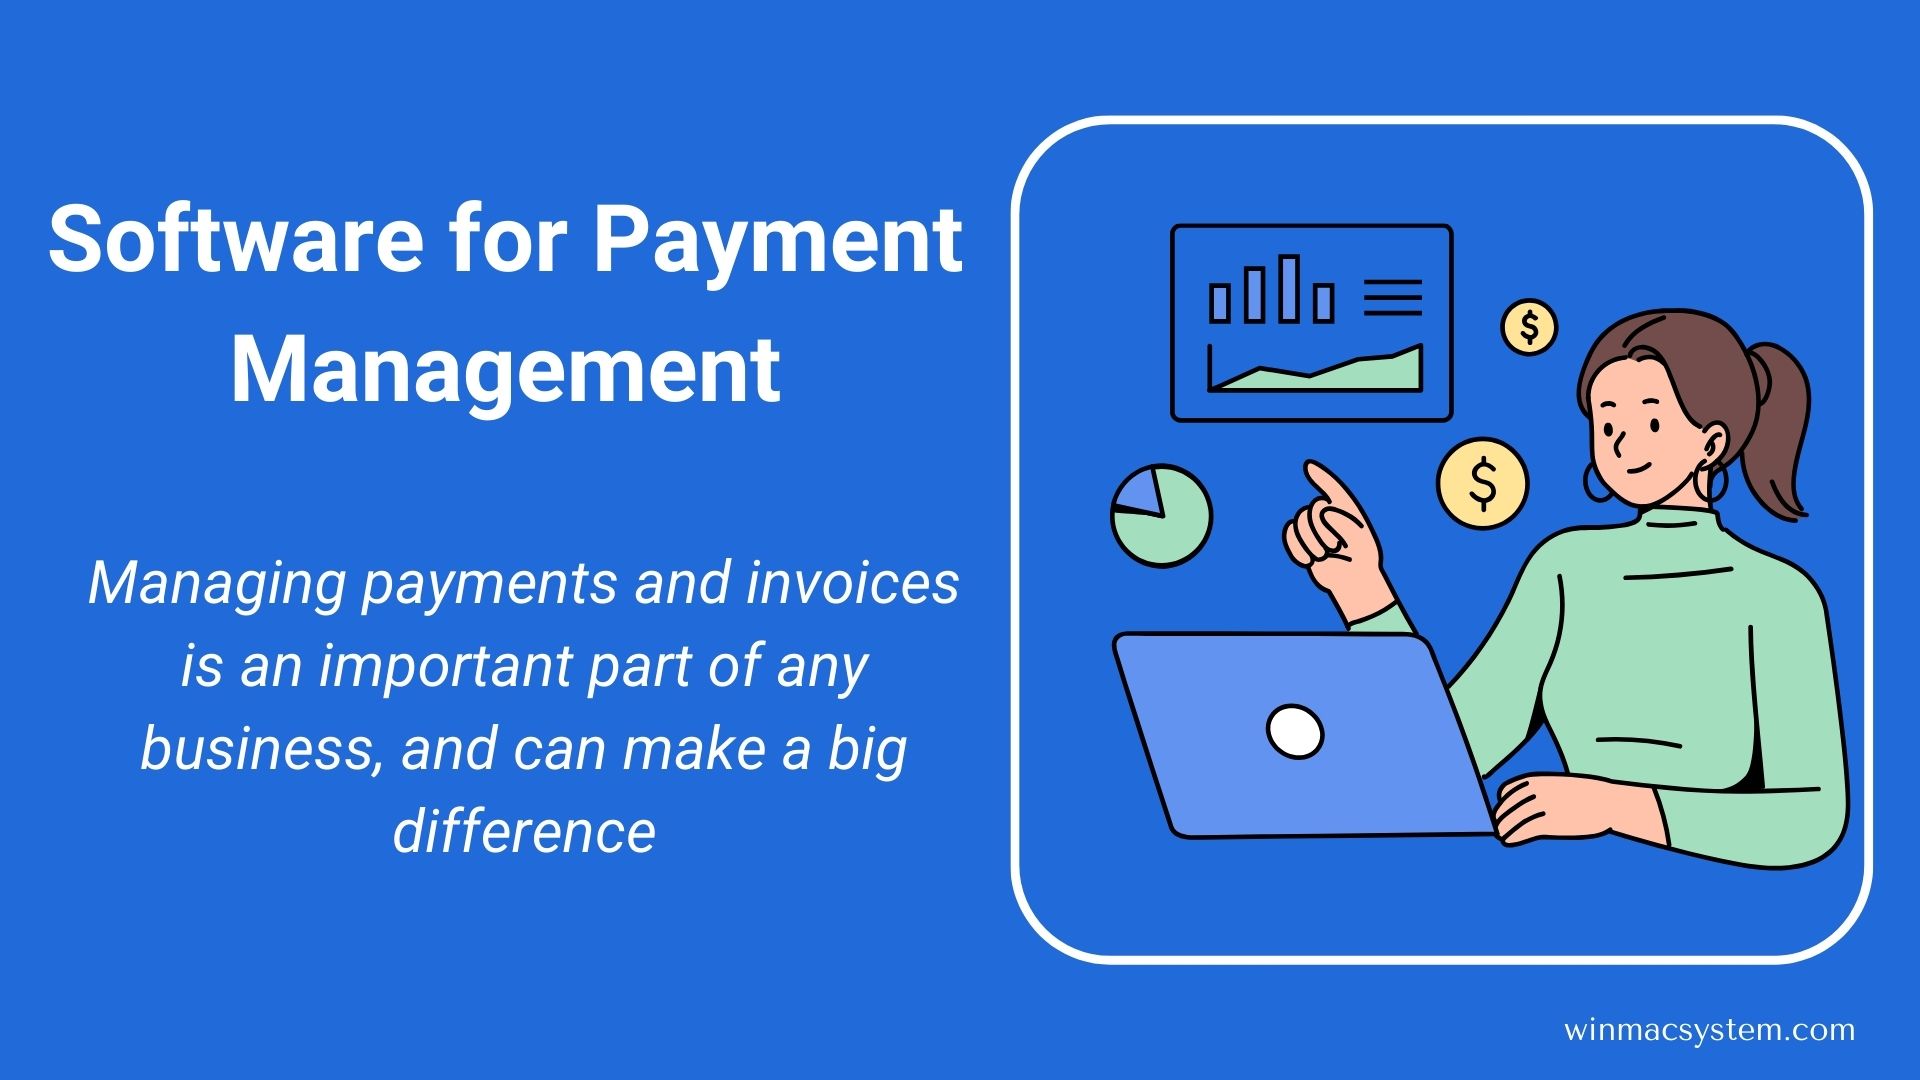 Software for Payment Management